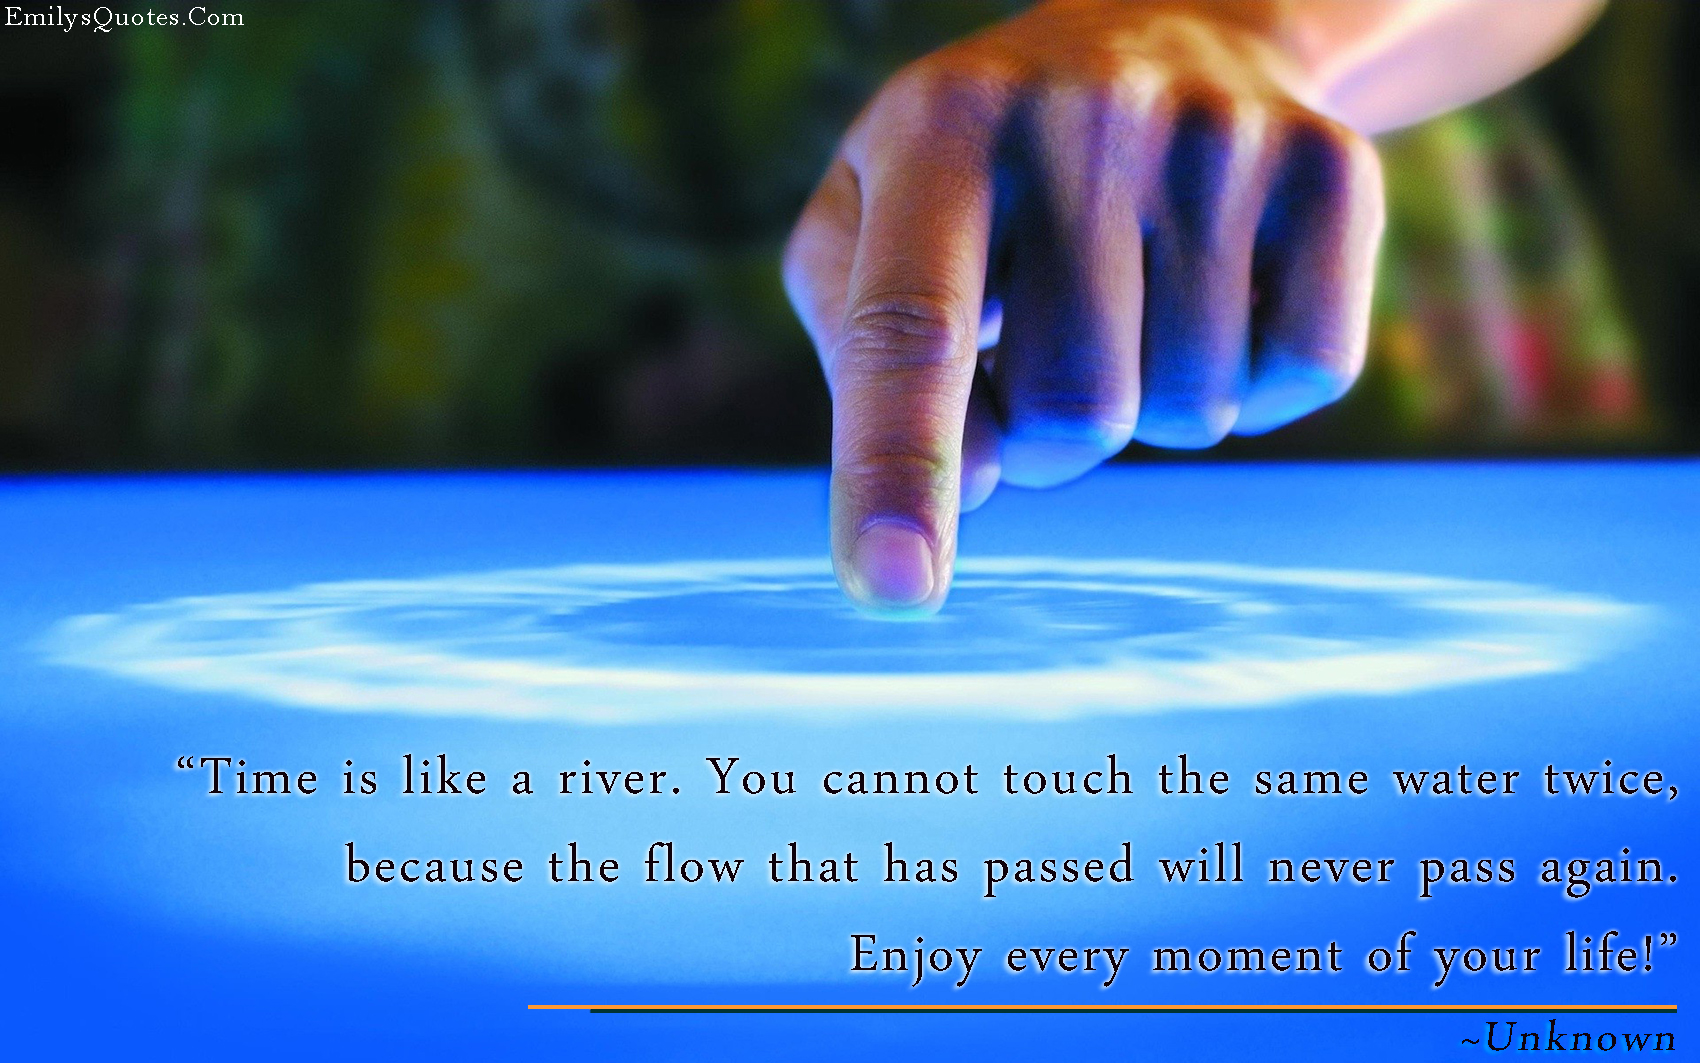 Time is like a river. You cannot touch the same water twice, because the flow that has passed will never pass again. Enjoy every moment of your life